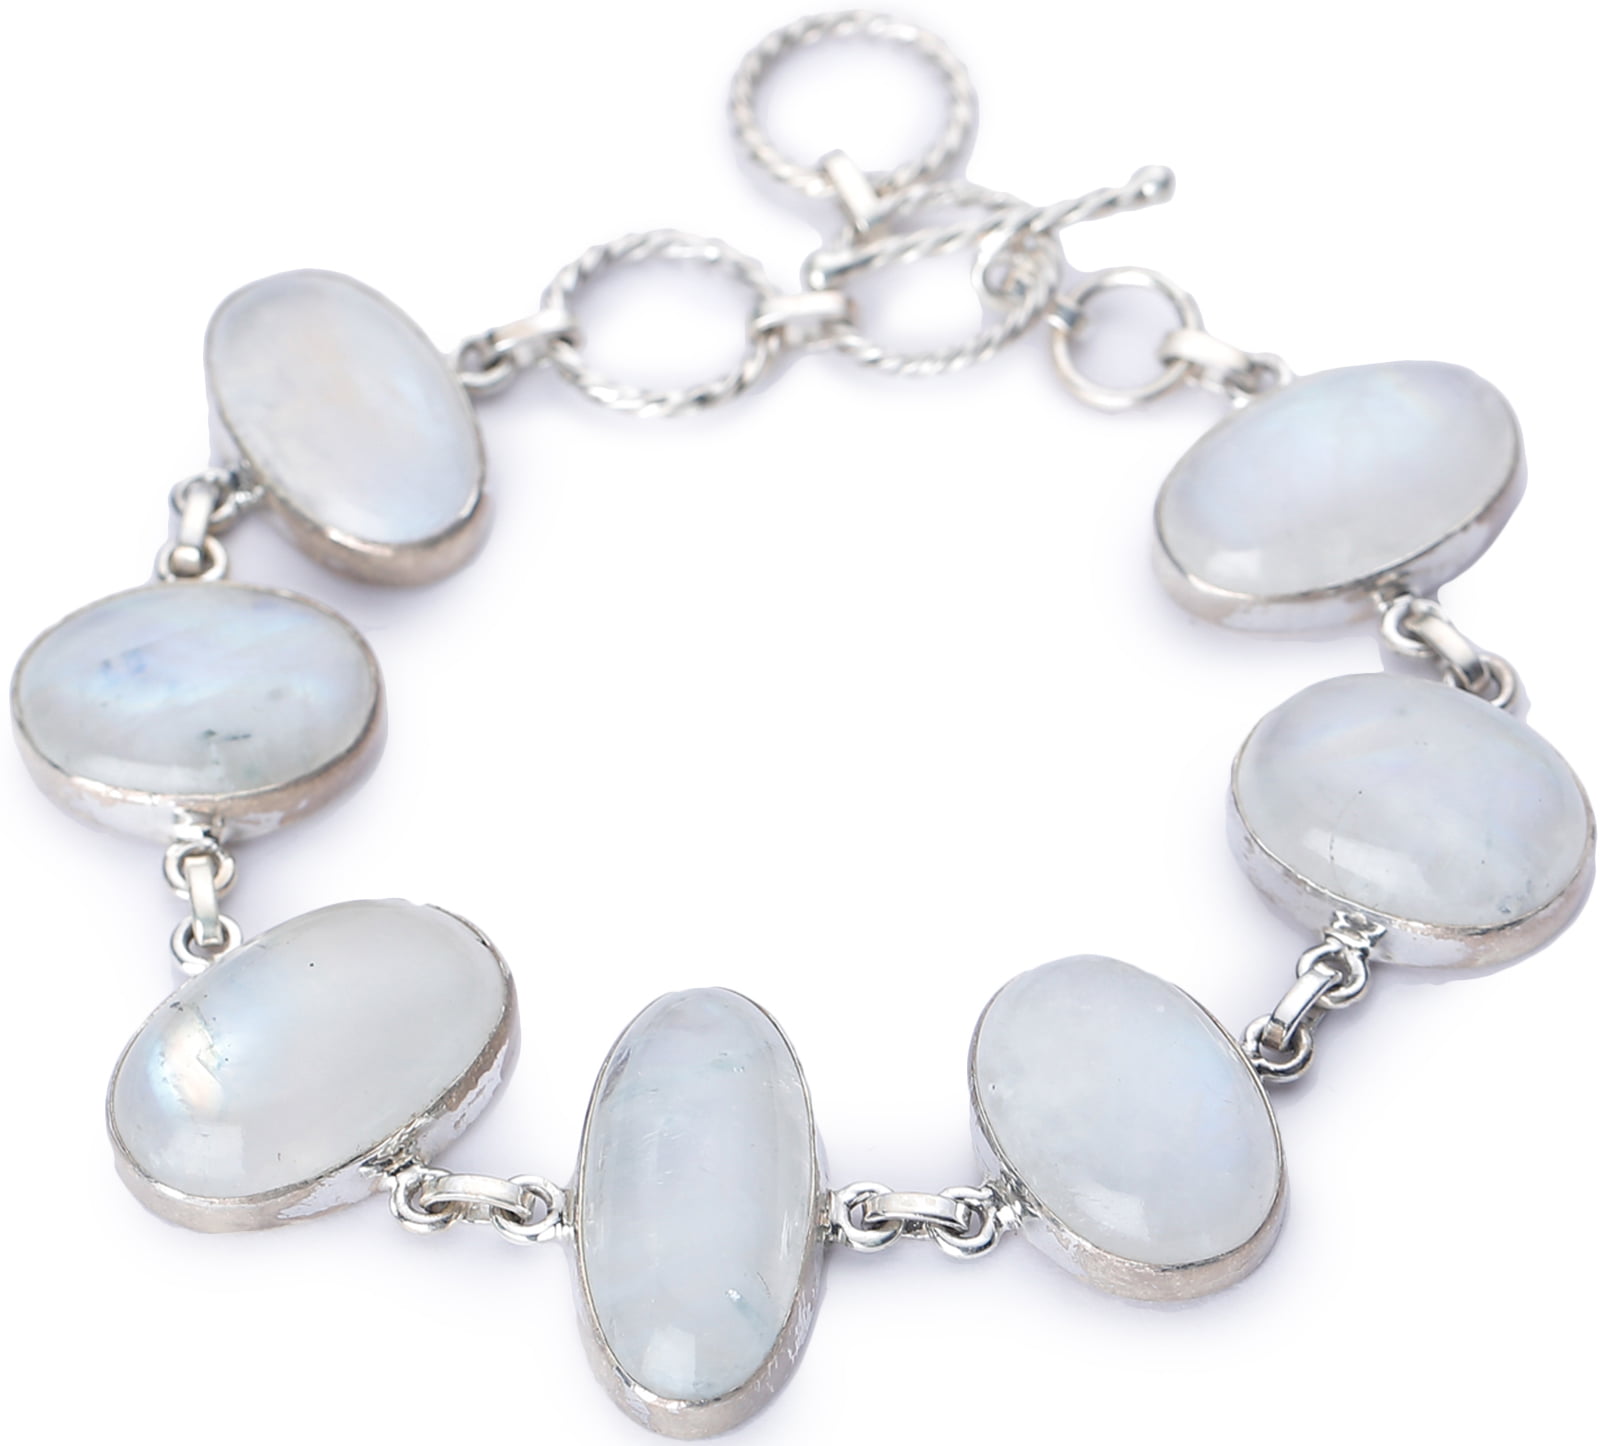 Equilibrium Moonstone Antique Silver Style Stretch Bracelets Costume Jewellery 